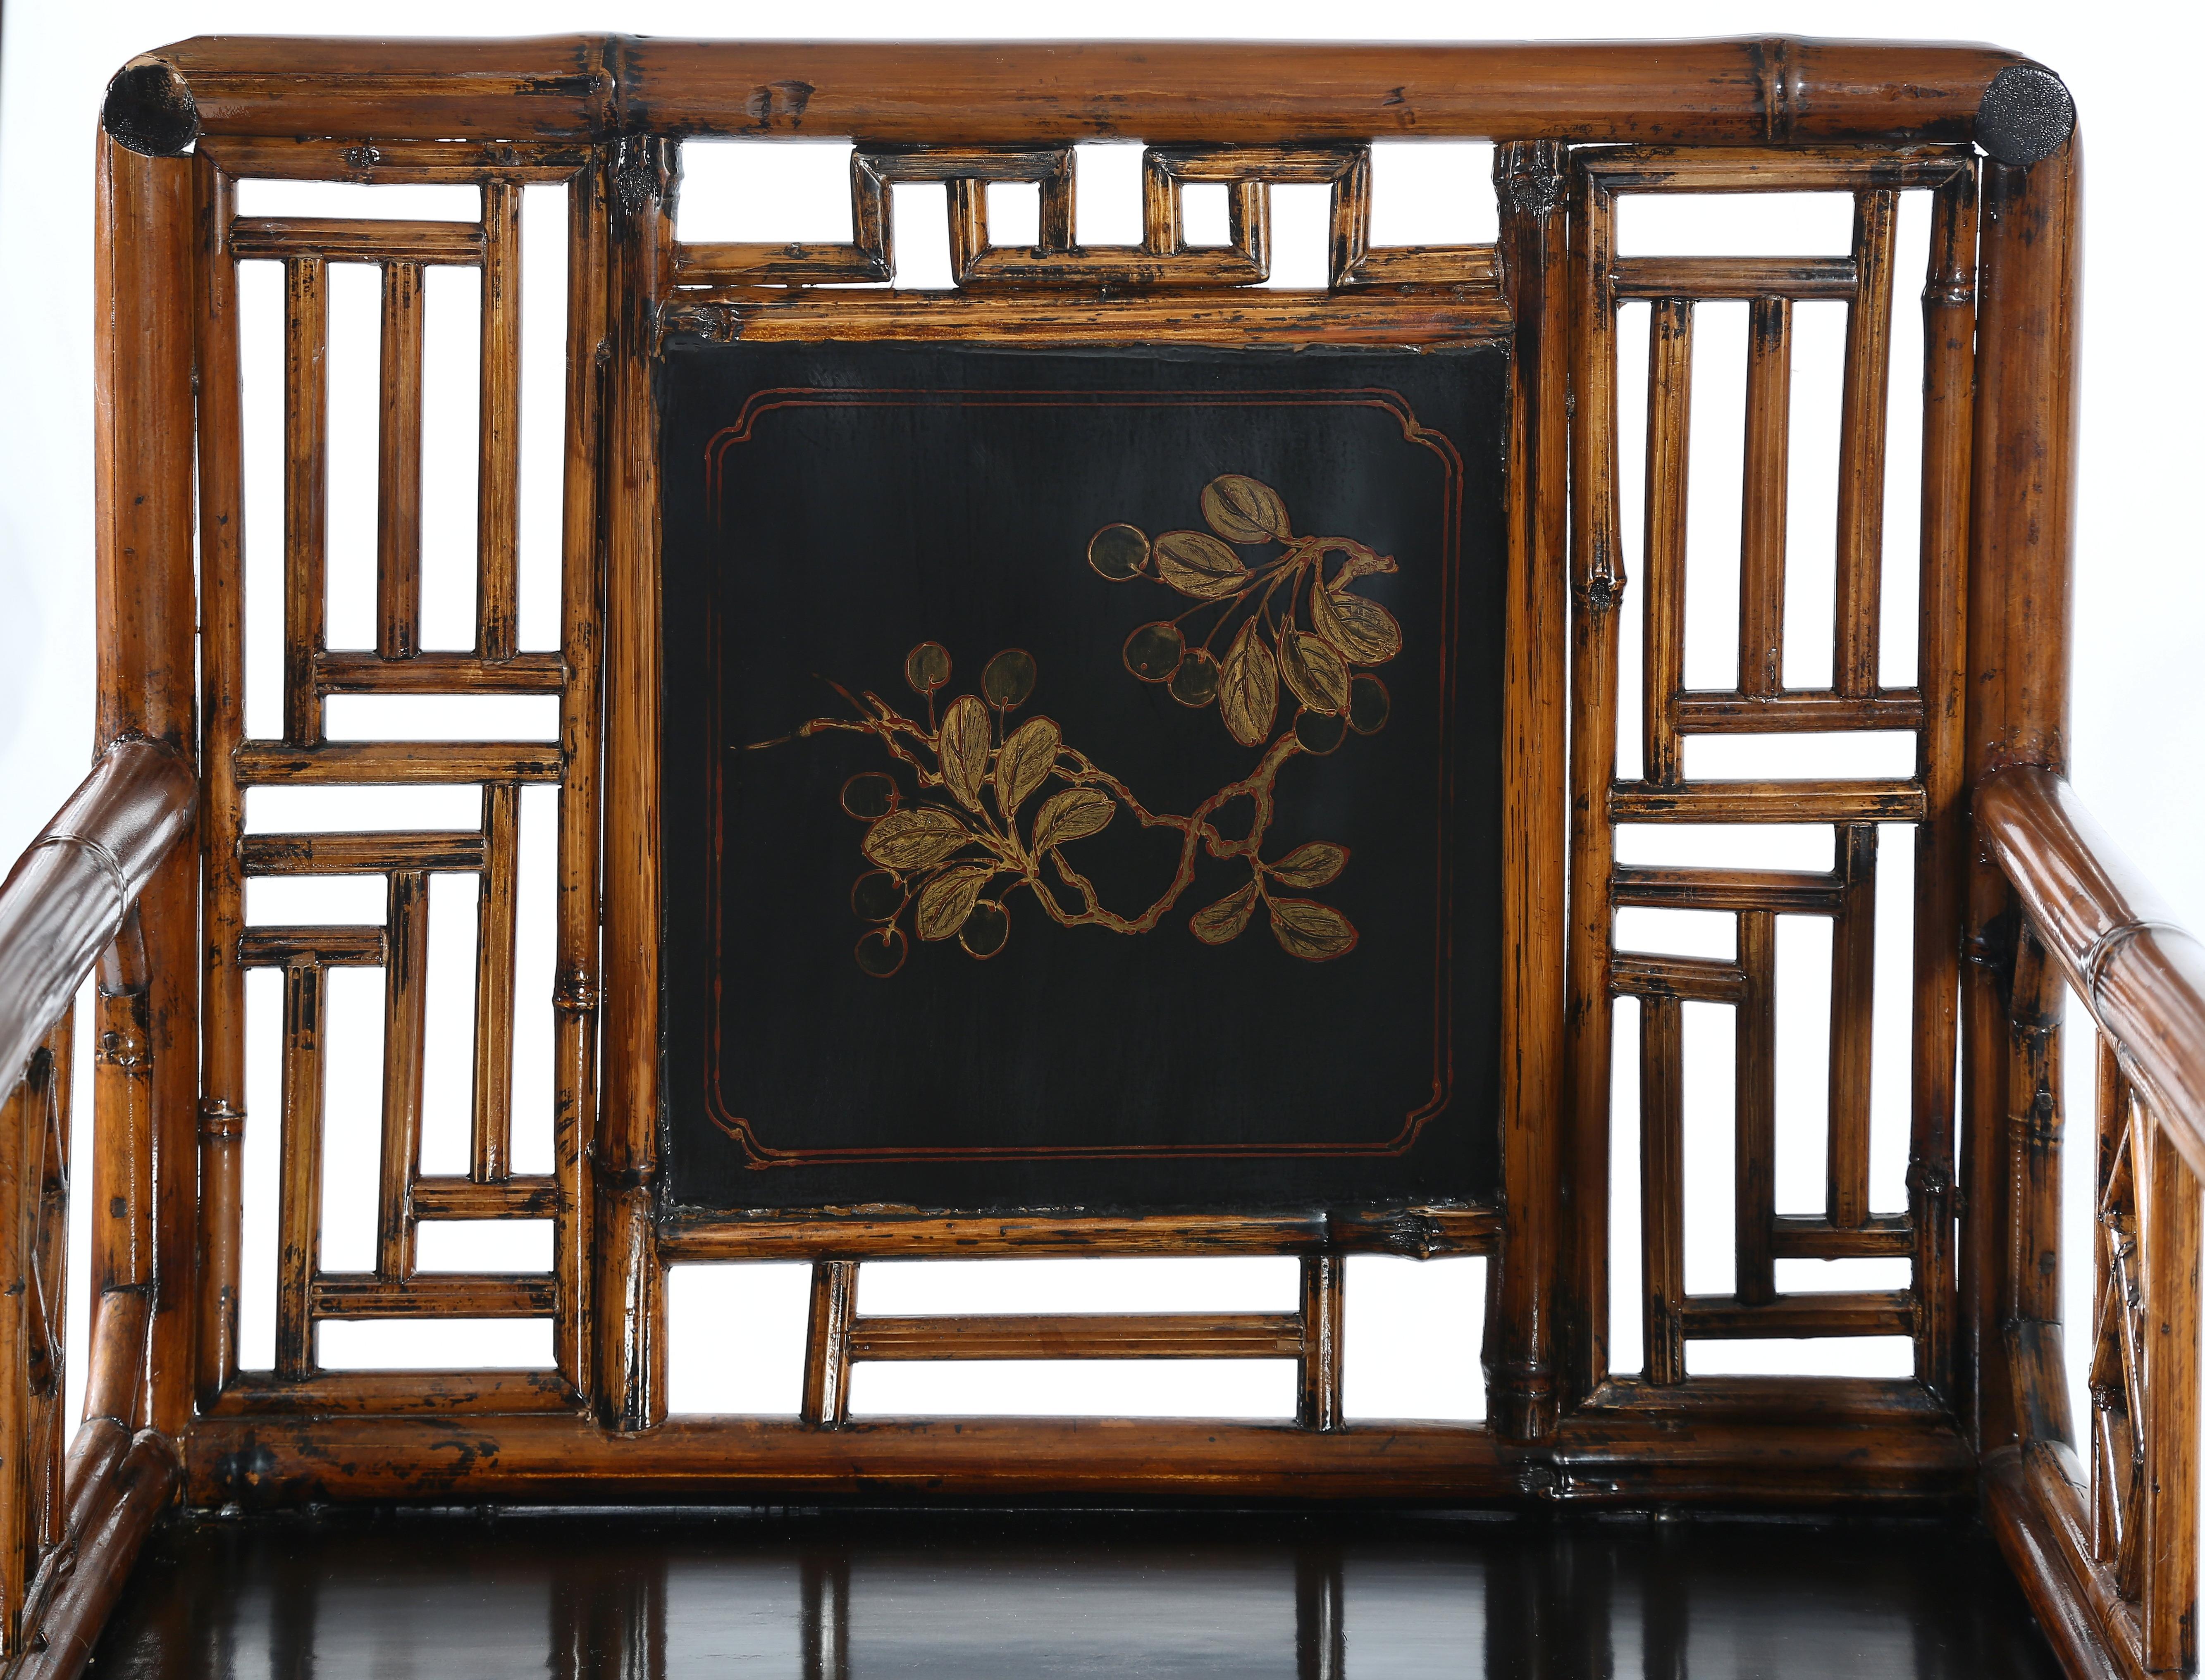 Chinese Set of 4 Bamboo Armchairs with Gilt Floral Painting on Black Lacquer Back